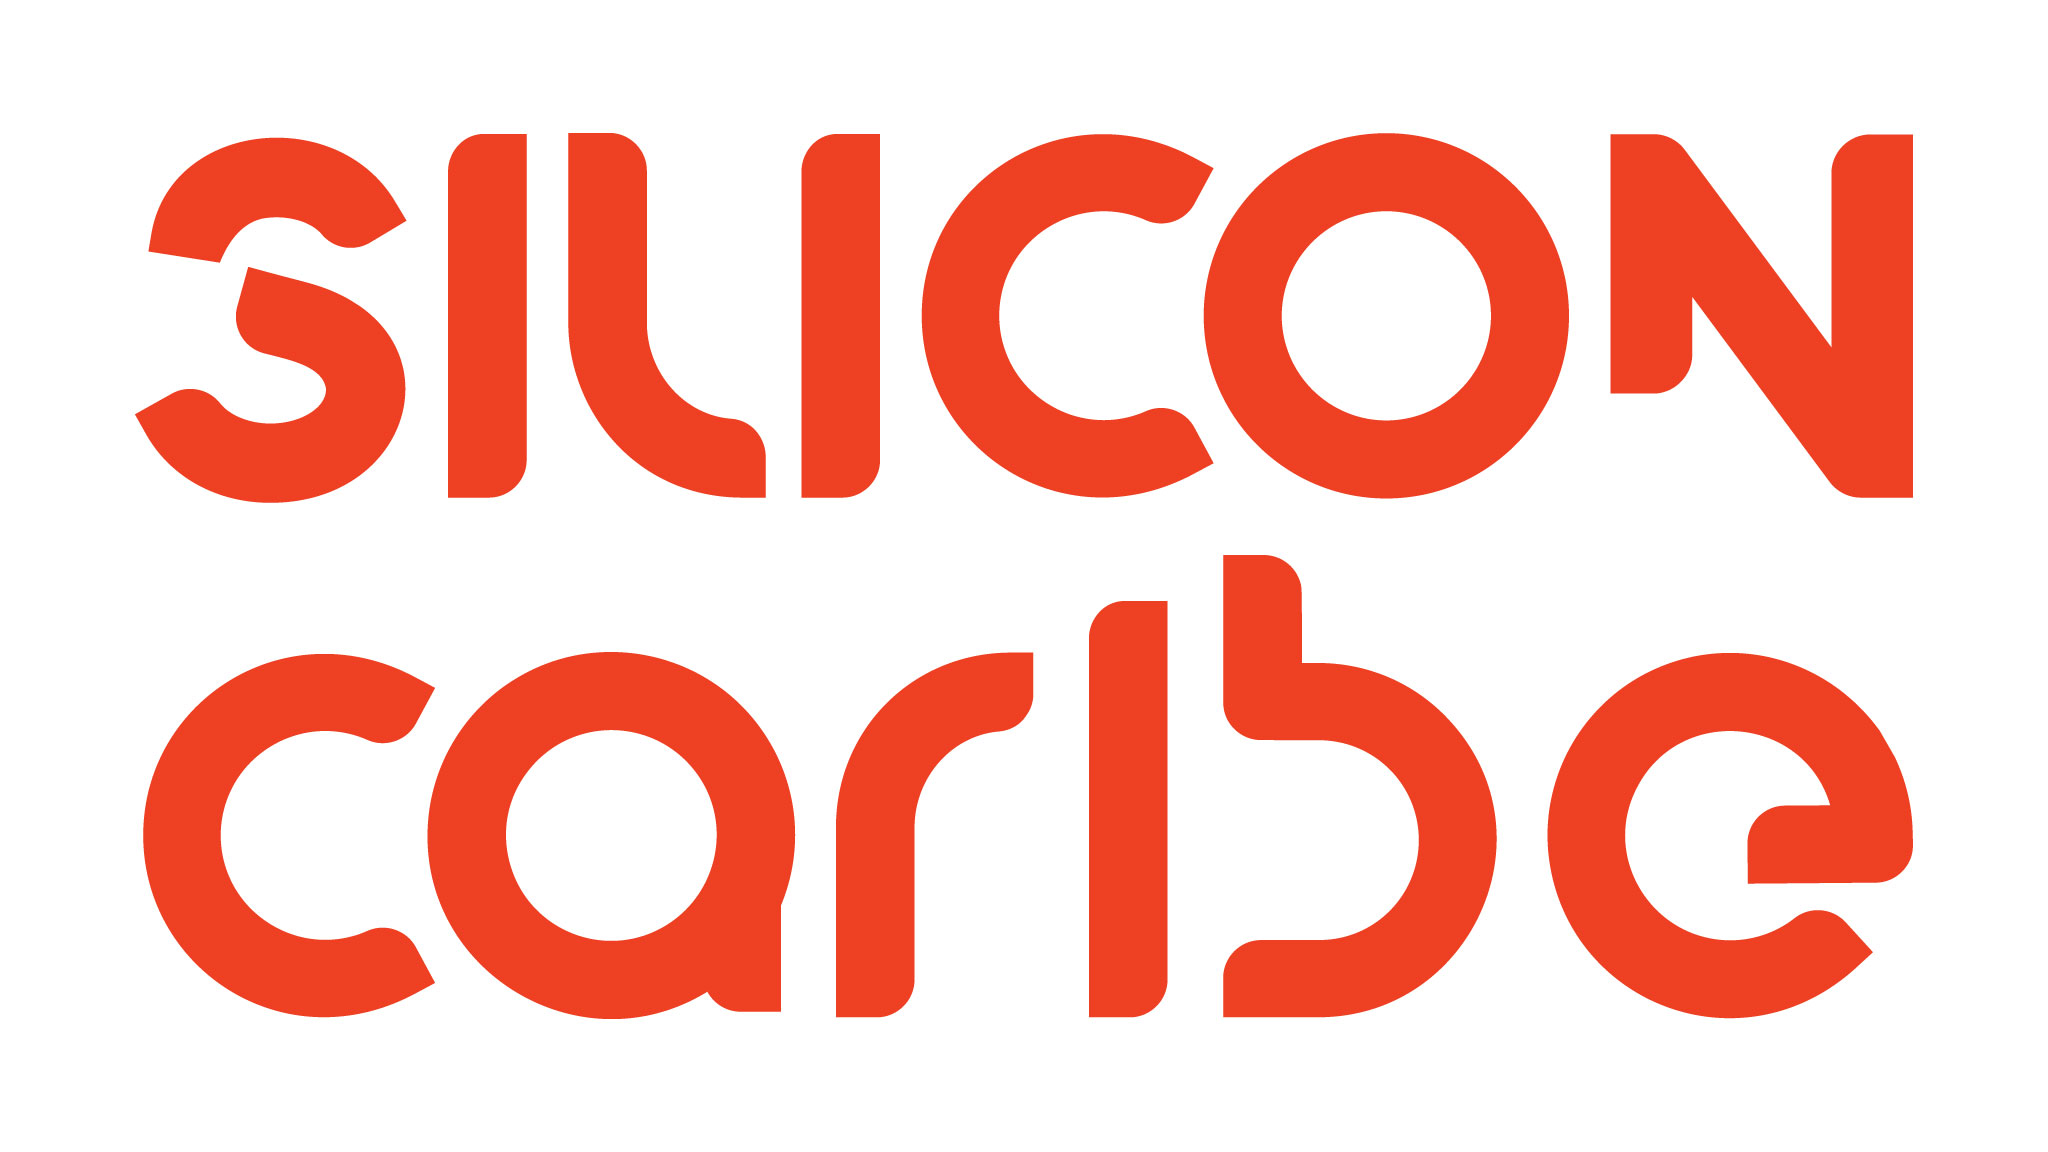 Silicon Caribe – Caribbean Tech News and Caribbean Business News, Caribbean Startup News, Caribbean Tech Events and Tech Communities